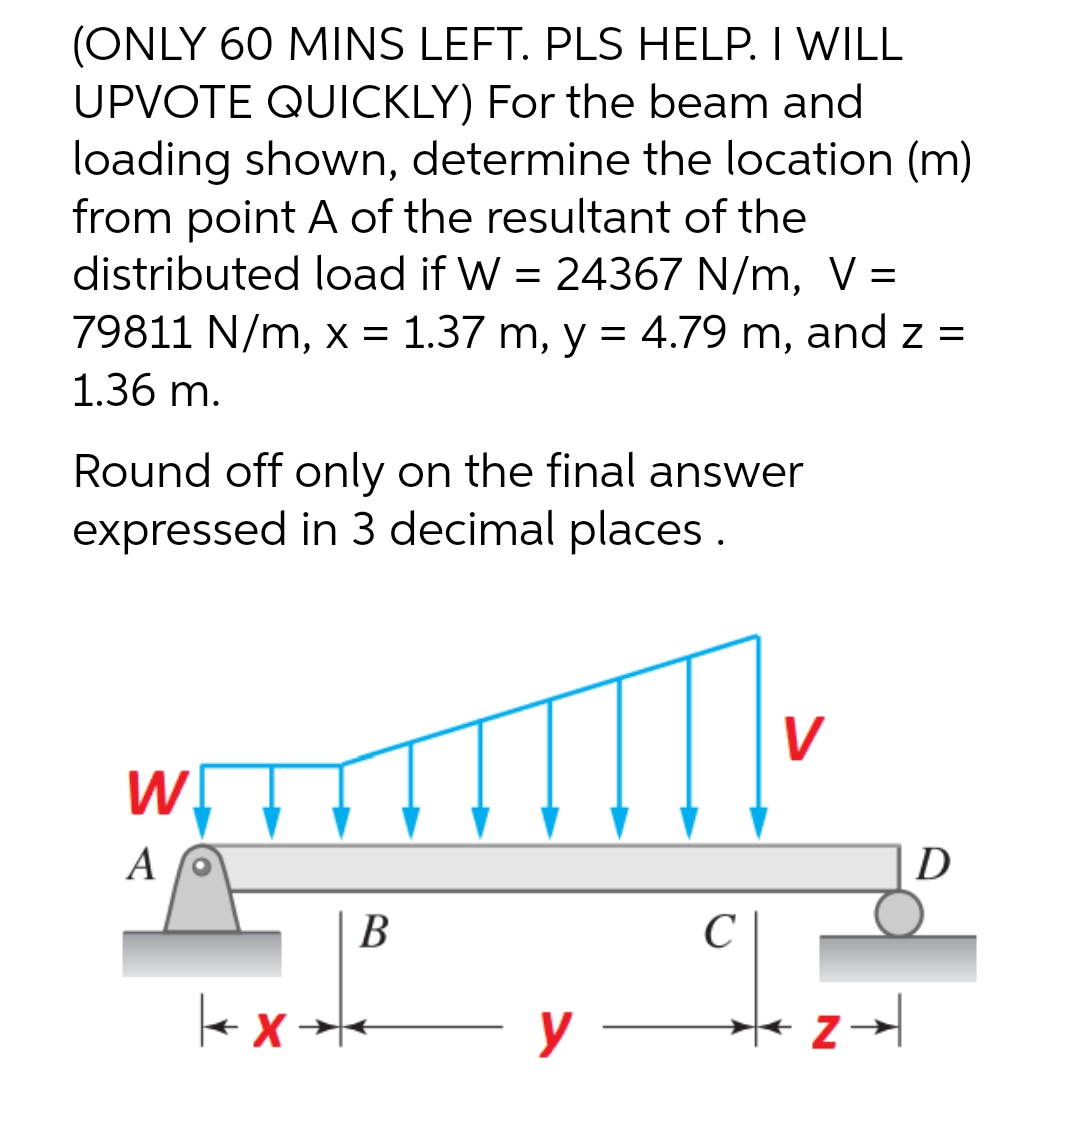 (ONLY 60 MINS LEFT. PLS HELP. I WILL
UPVOTE QUICKLY) For the beam and
loading shown, determine the location (m)
from point A of the resultant of the
distributed load if W = 24367 N/m, V =
79811 N/m, x = 1.37 m, y = 4.79 m, and z =
1.36 m.
Round off only on the final answer
expressed in 3 decimal places.
W
A
B
kx*
y
с
V
D
Z →→